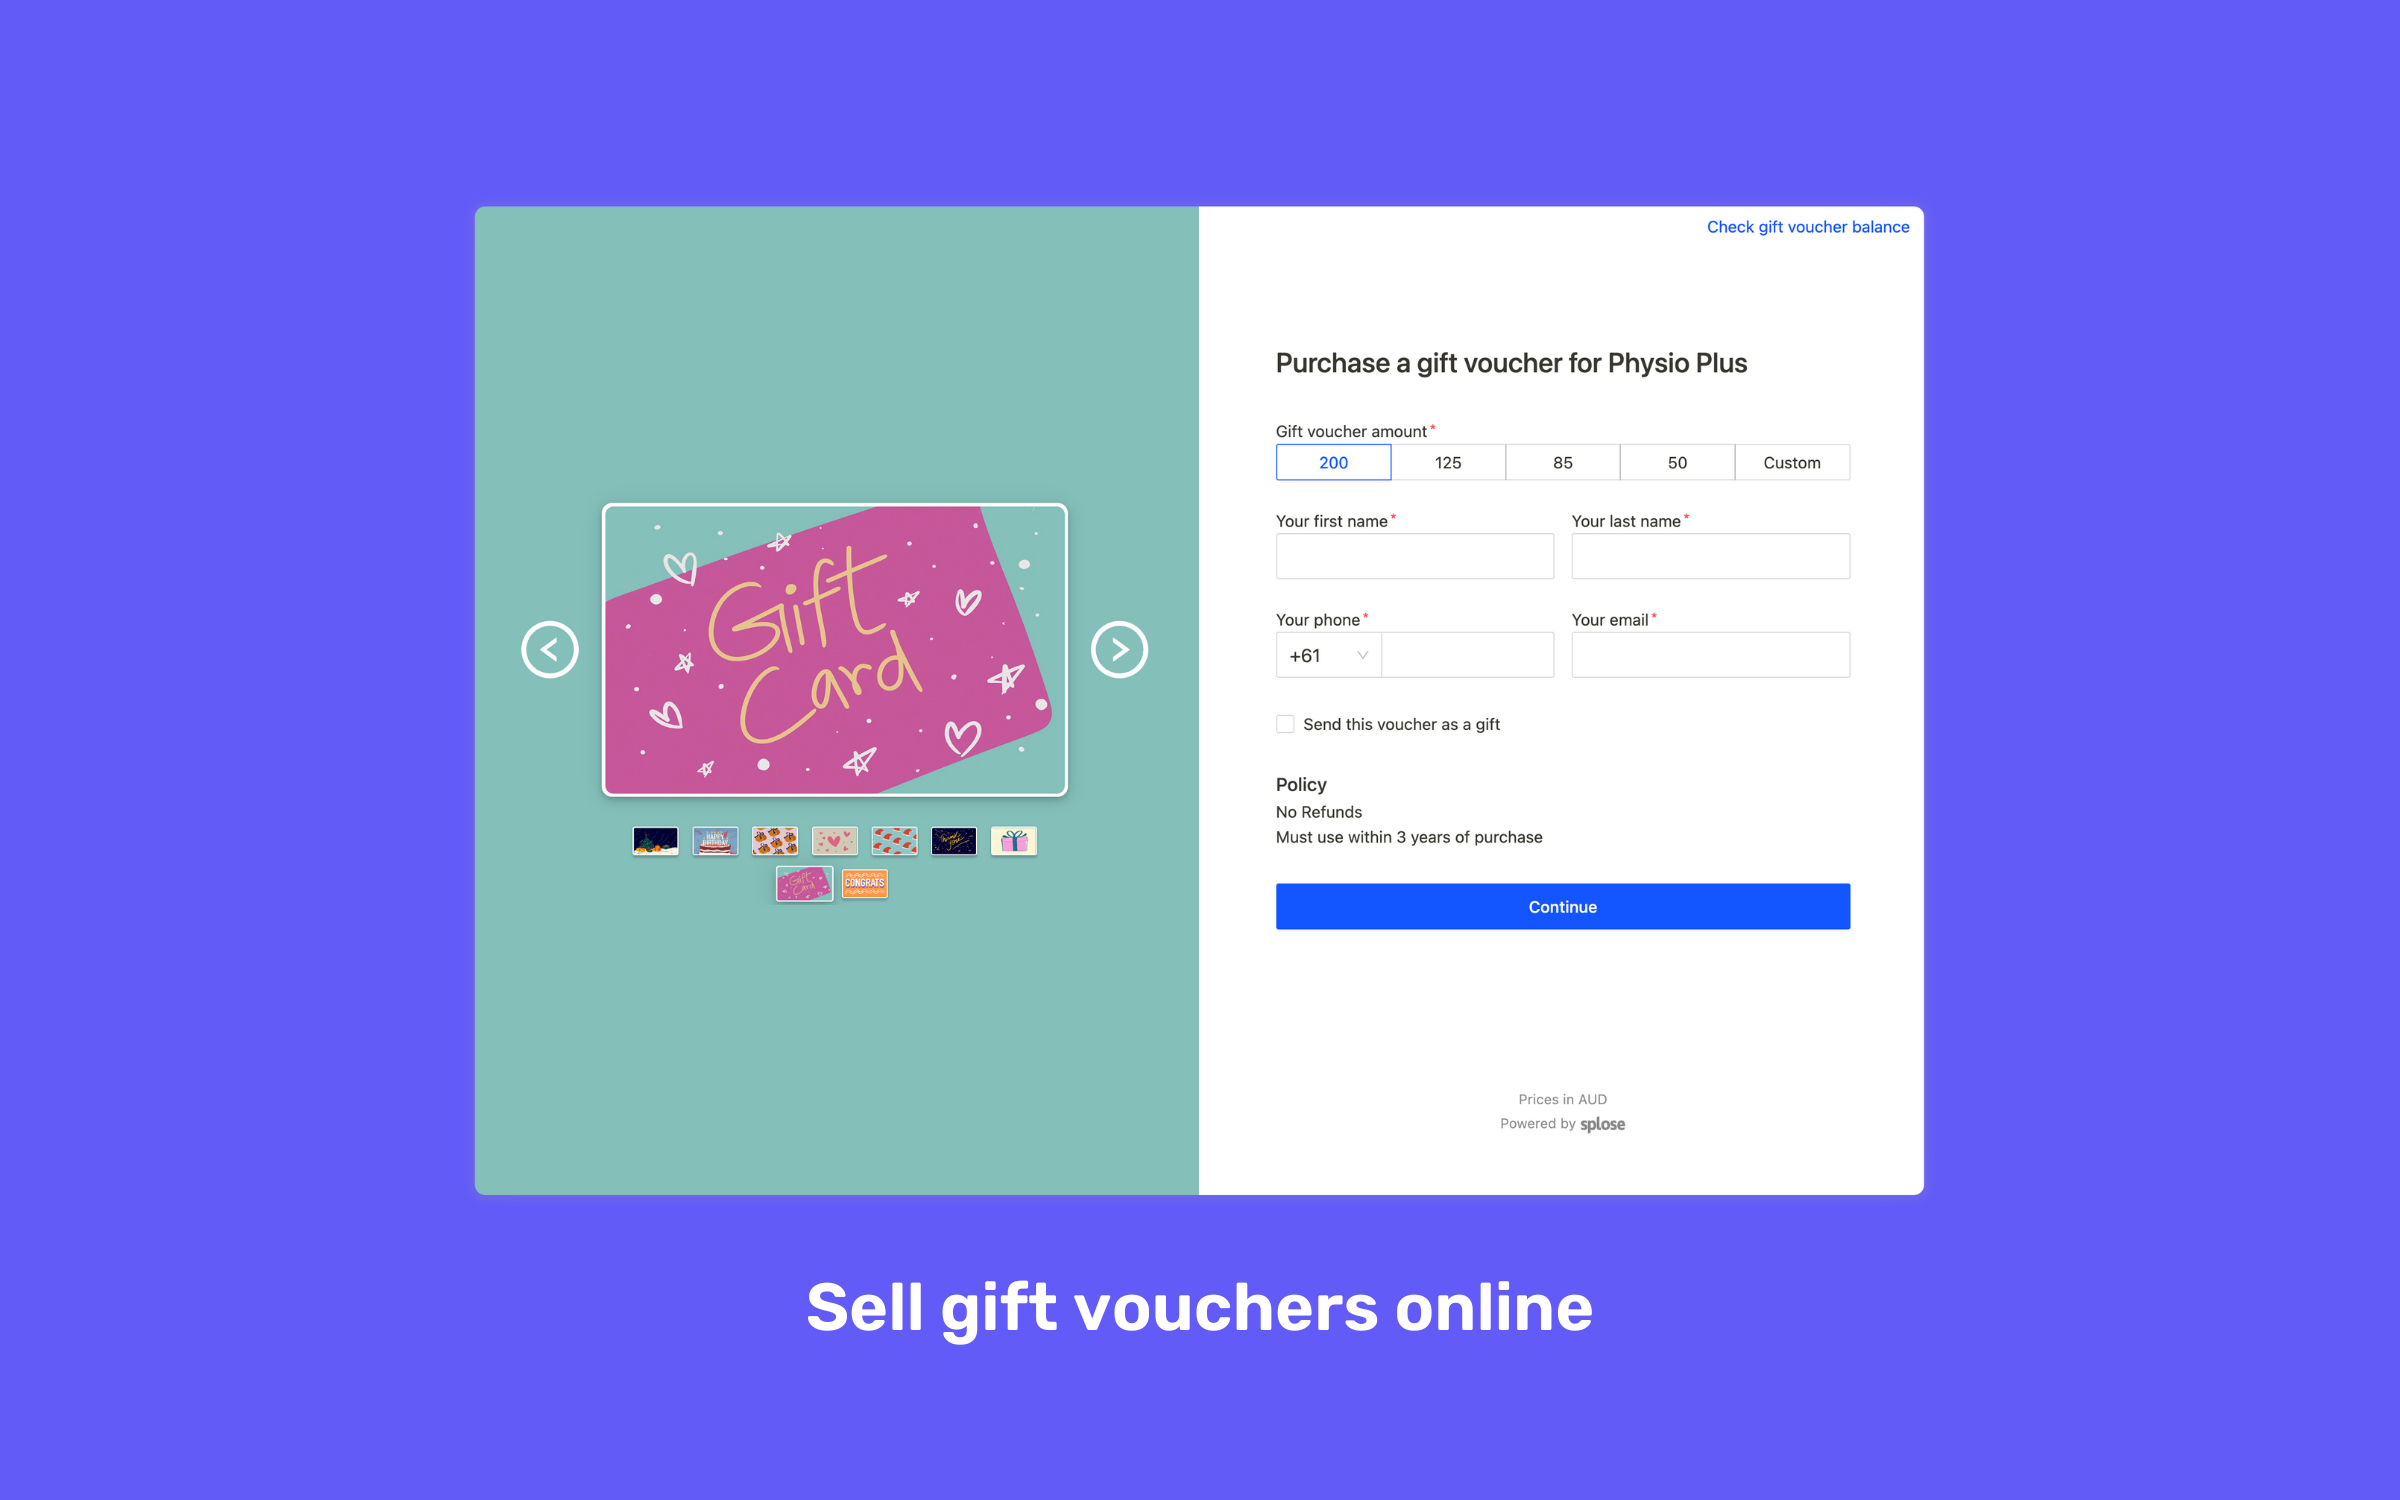 Sell gift vouchers online